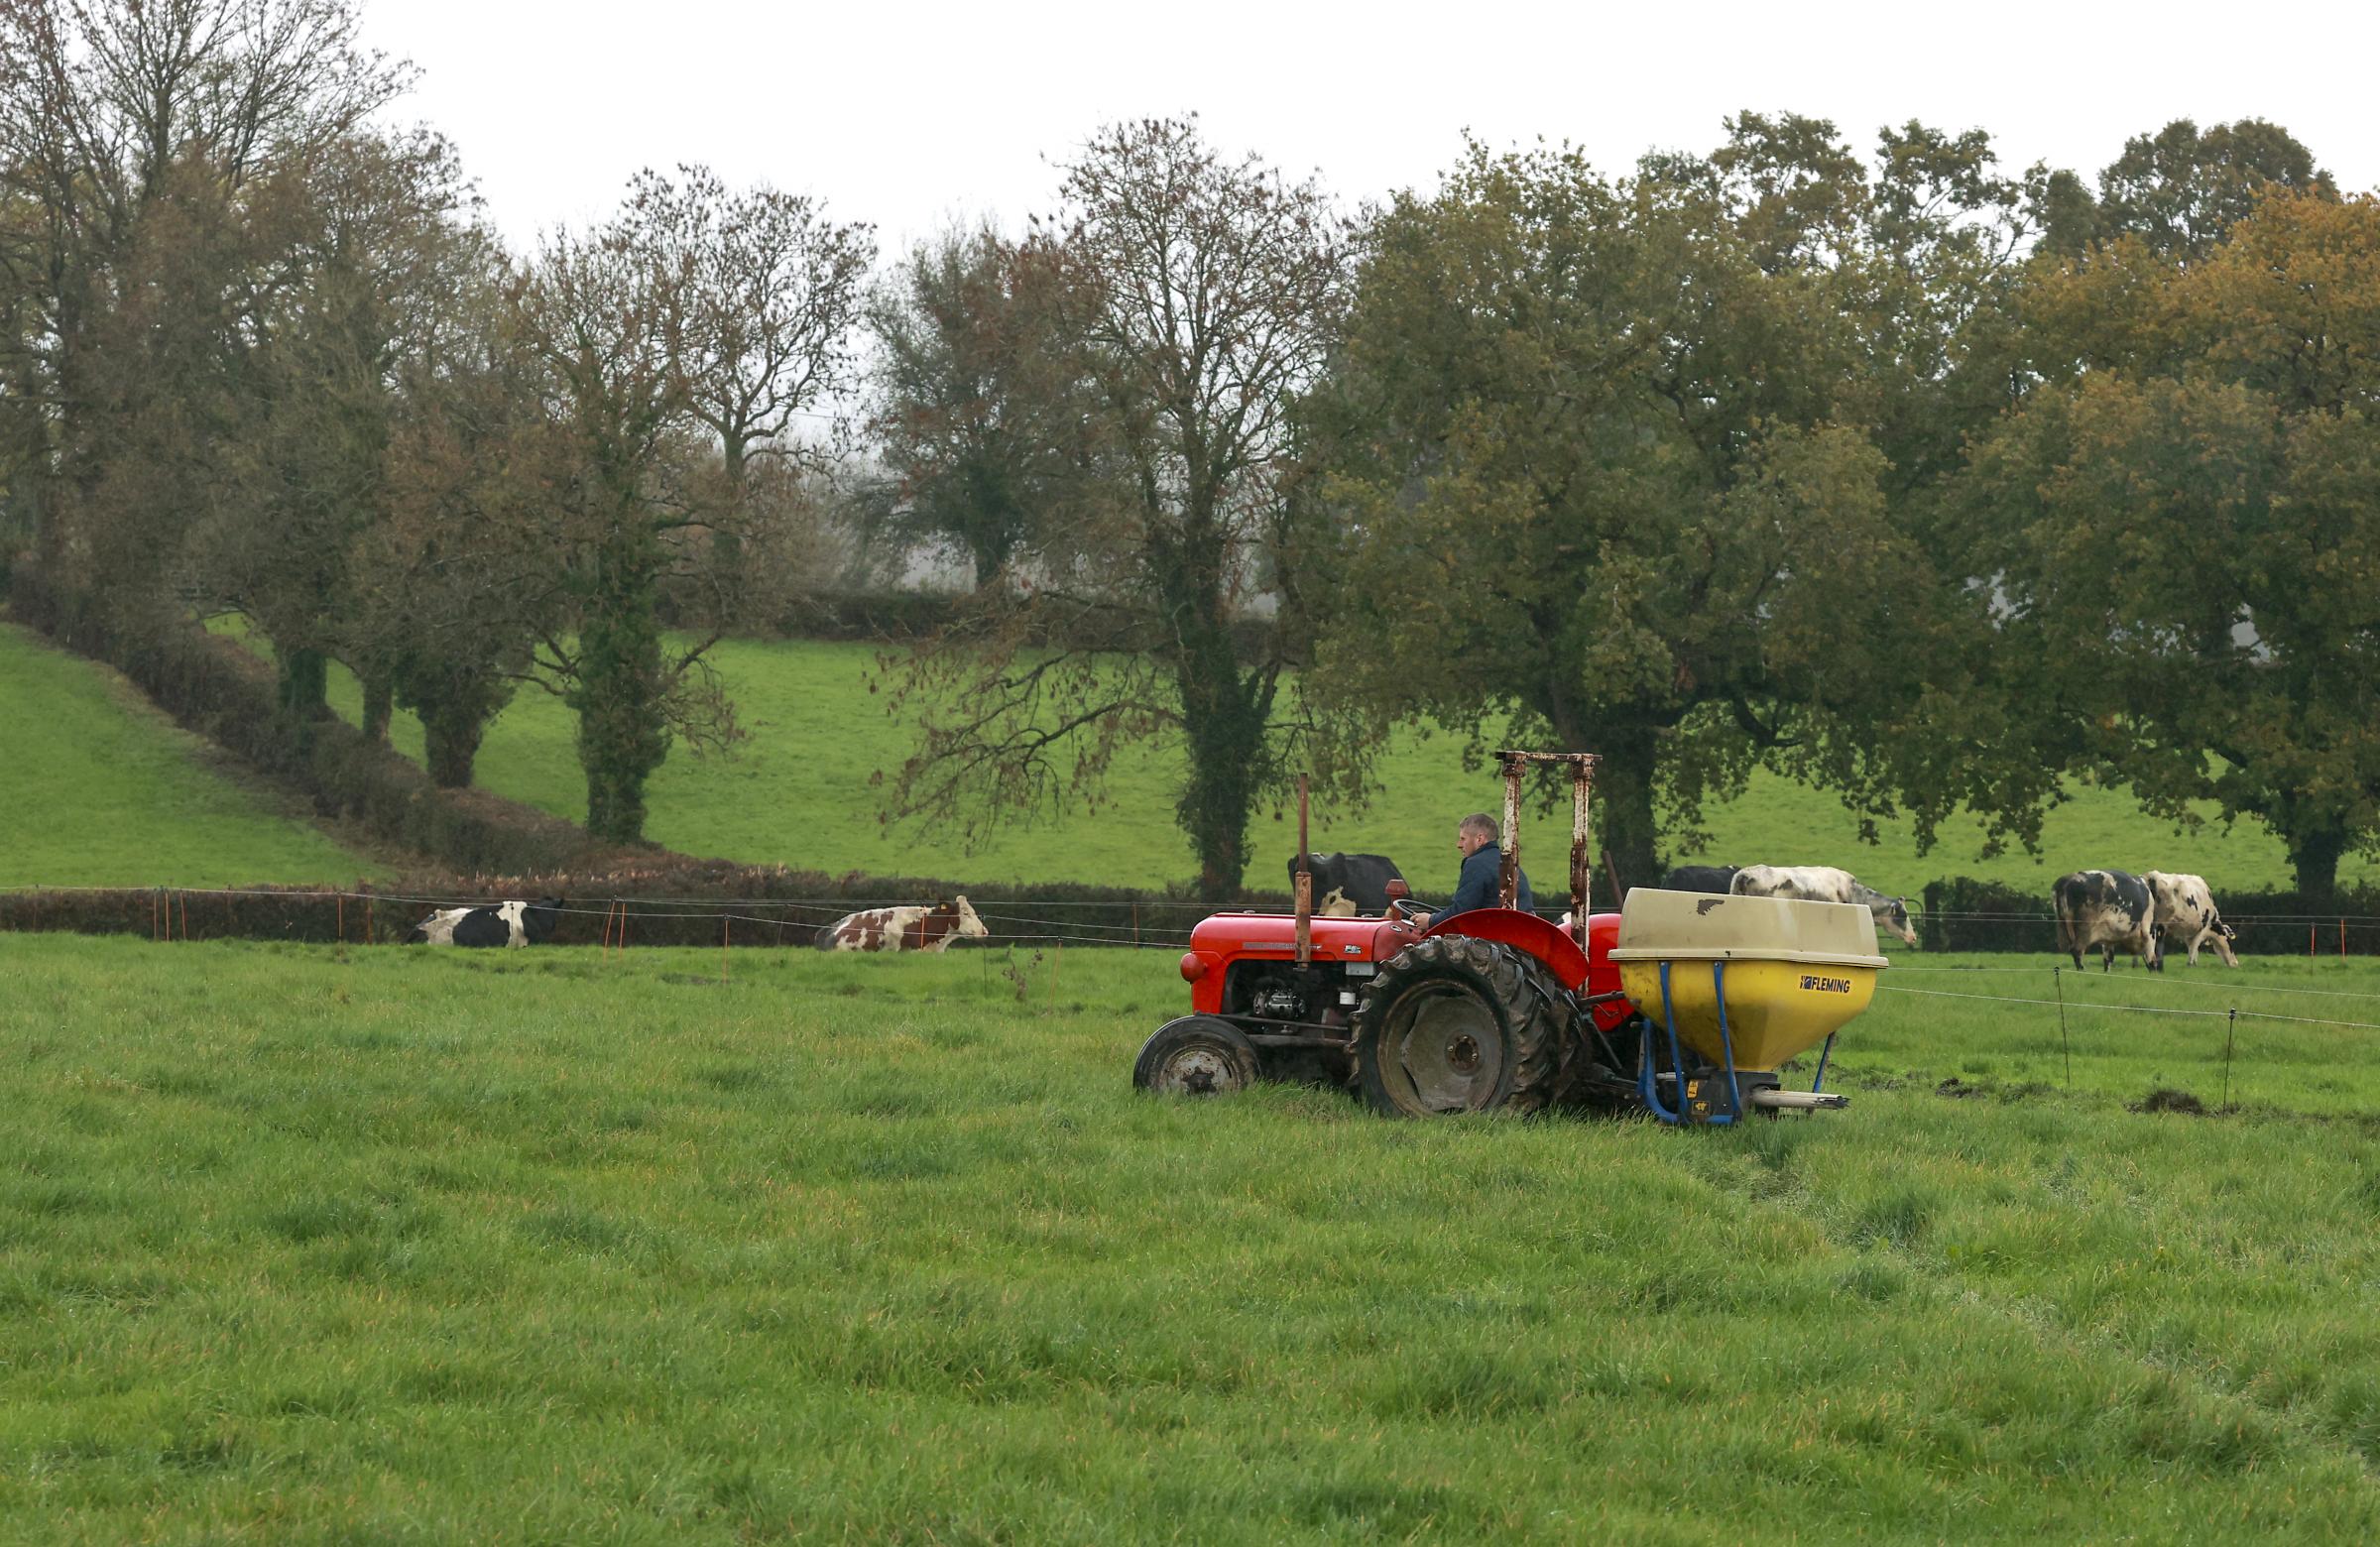 The ‘old reliables’ classic tractors still working away in Fermanagh